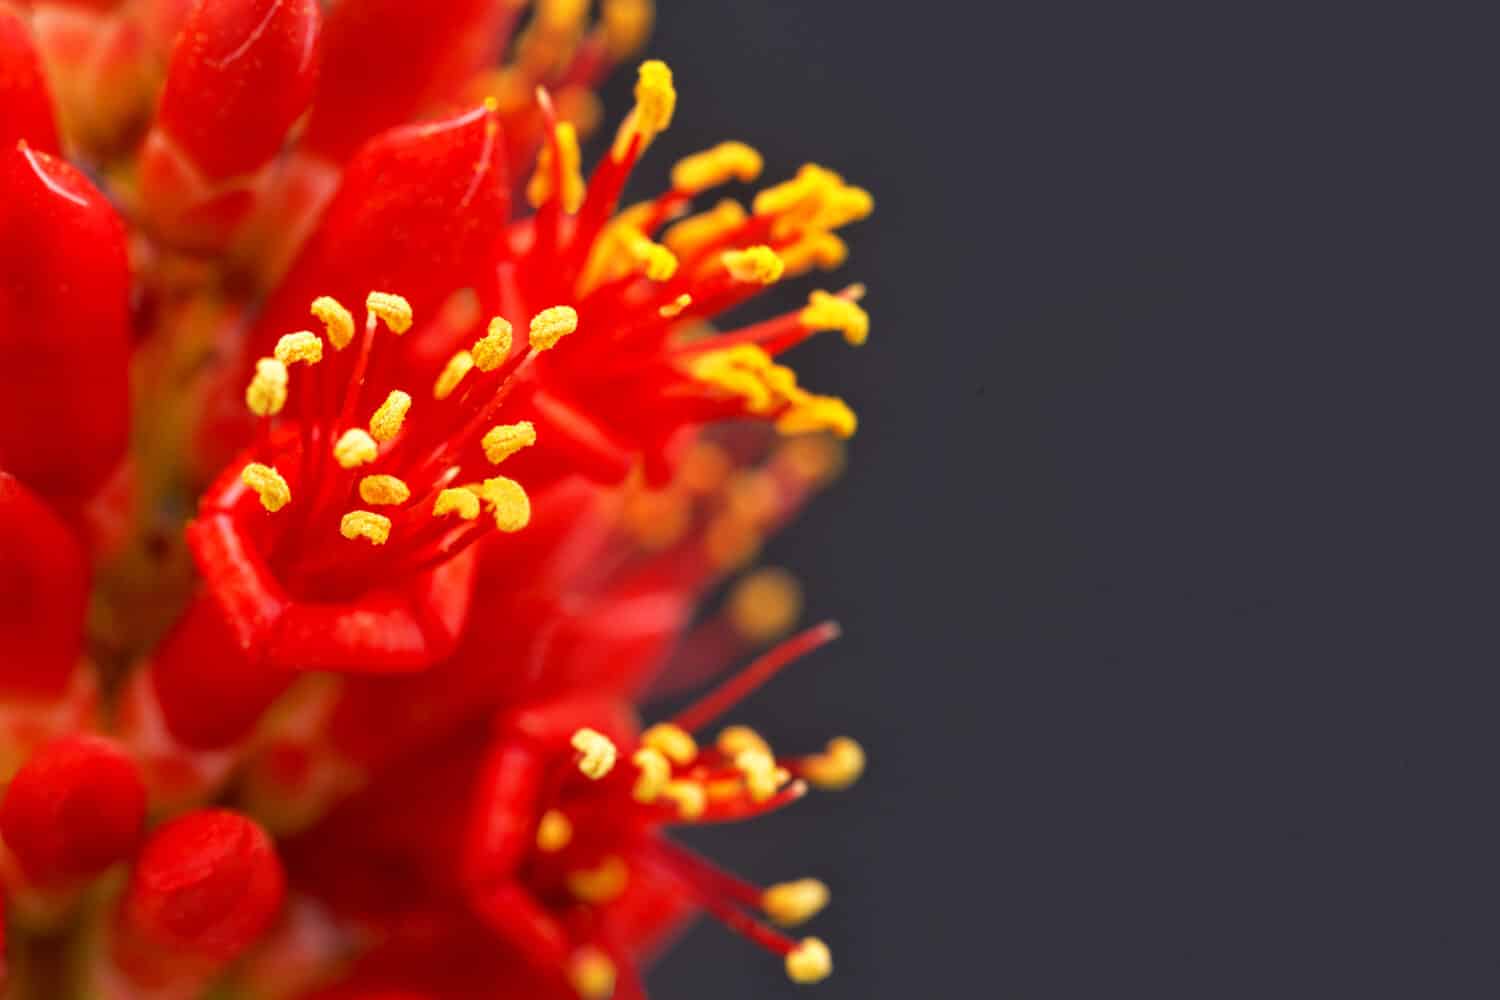 Dramatic focus on stamens of tube shaped red flowers of ocotillo, nicknamed candlewood, desert coral, or coachwhip, indigenous to American Southwest